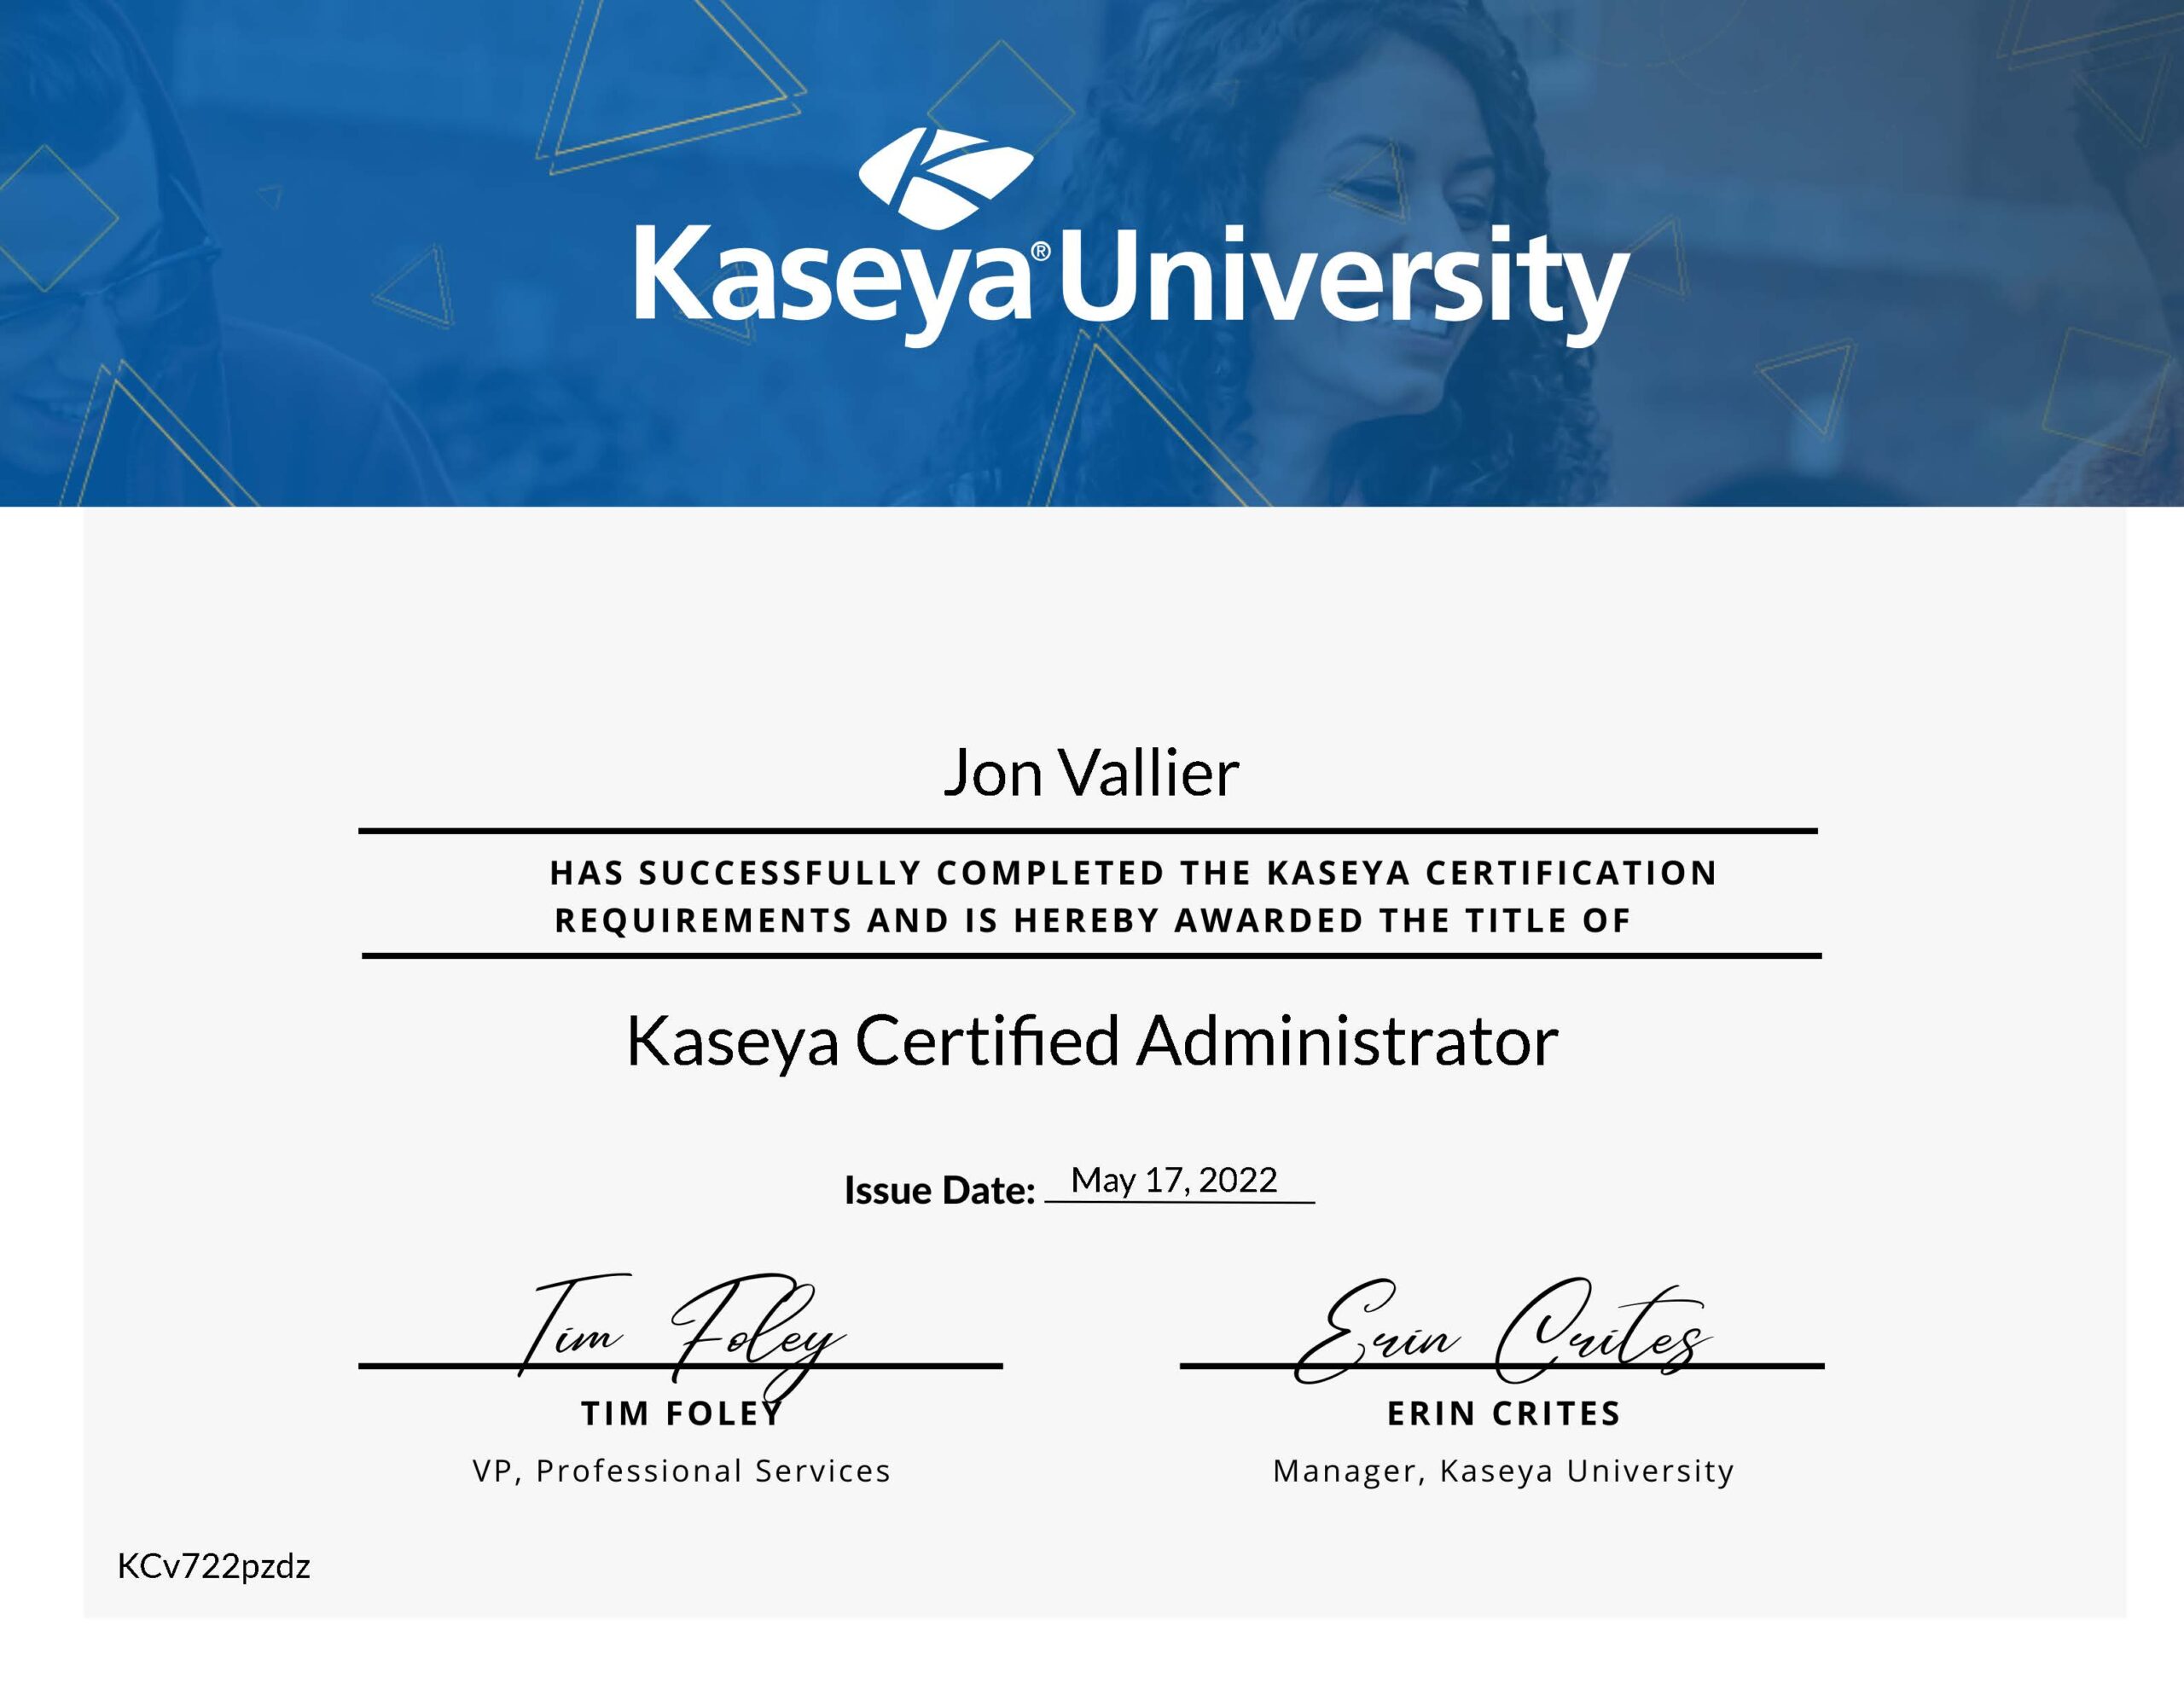 Completed requirements for “VSA Kaseya Certified Administrator” by Kaseya University